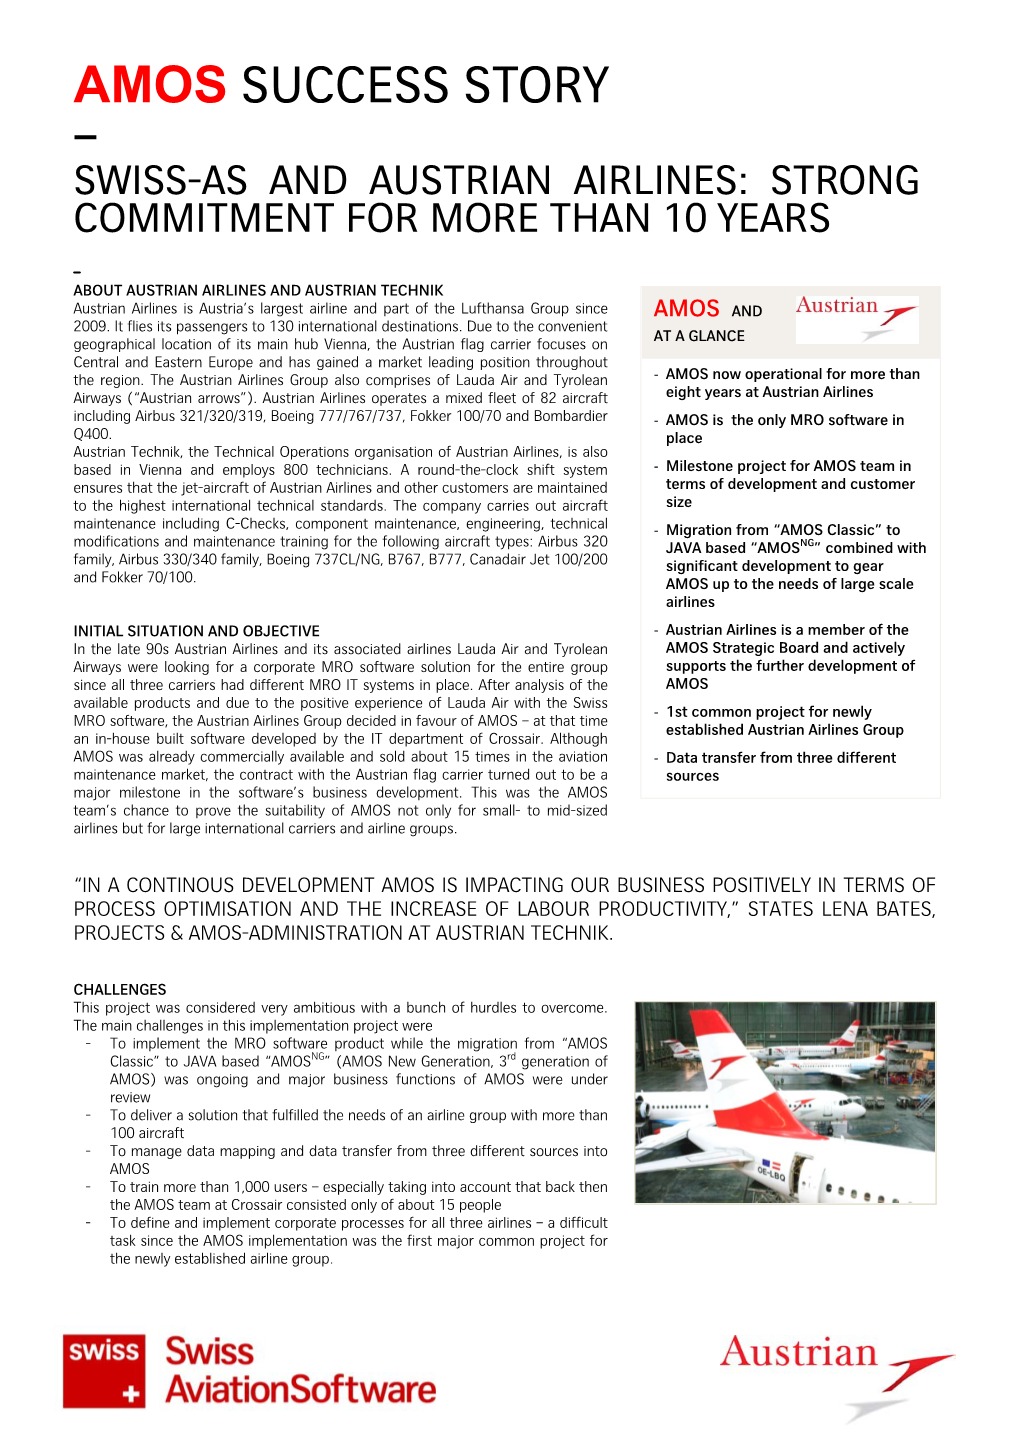 Amos Success Story – Swiss-As and Austrian Airlines: Strong Commitment for More Than 10 Years